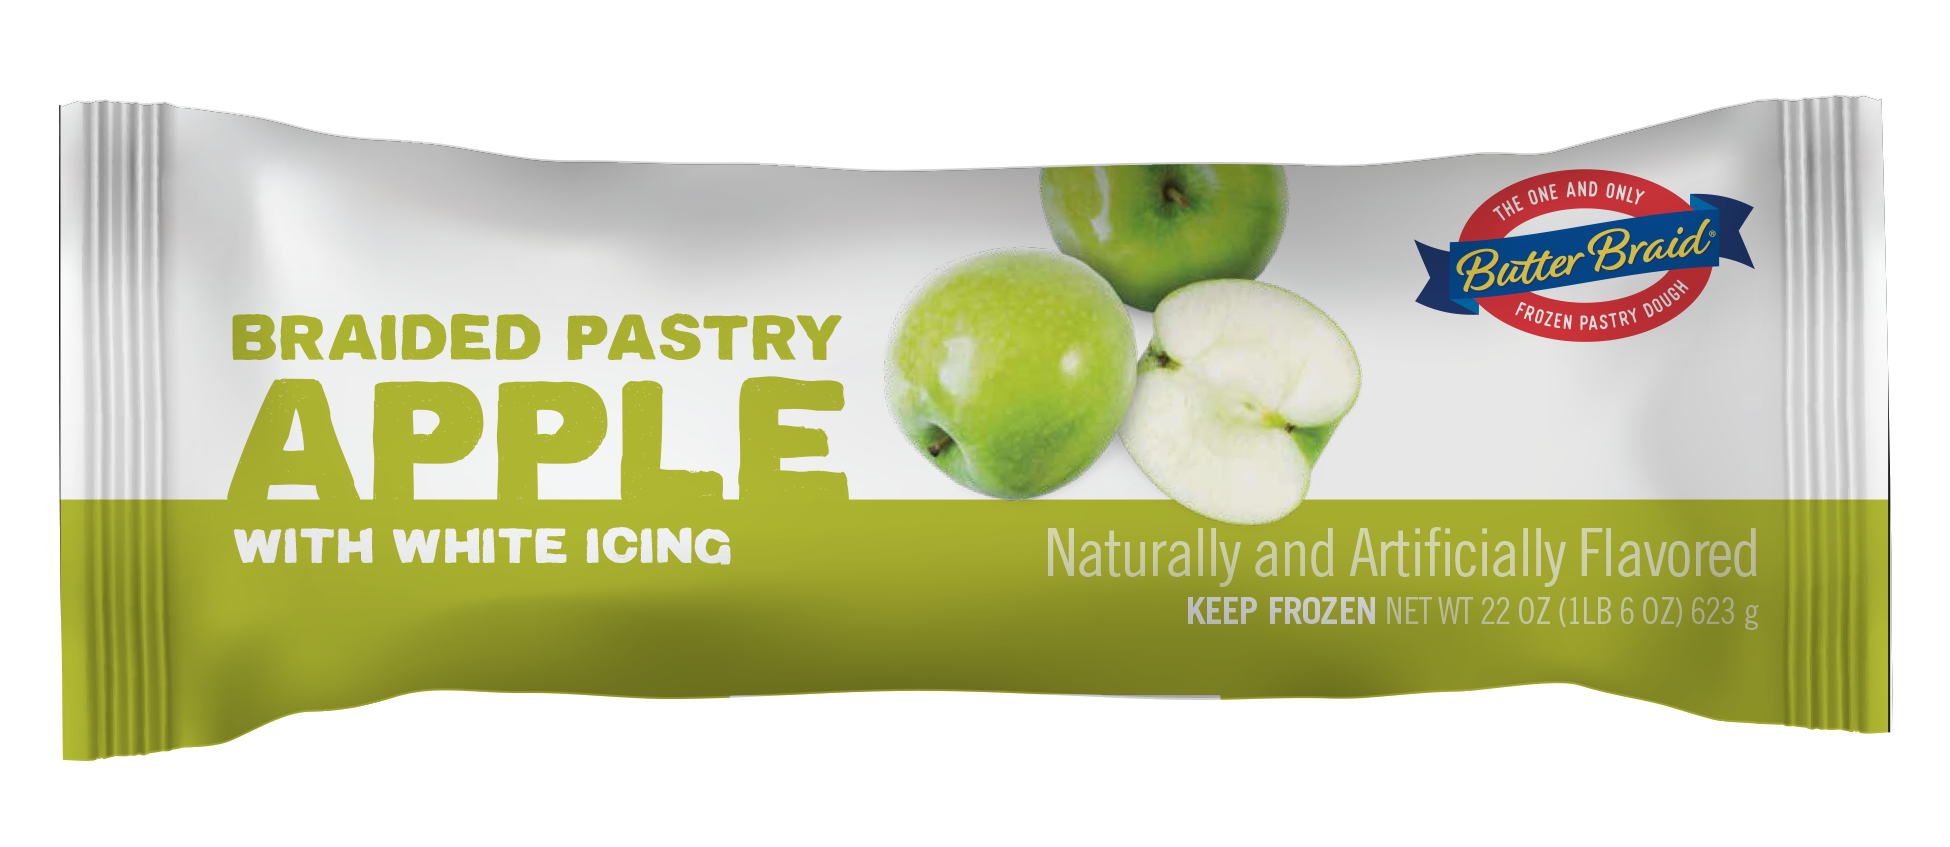 Apple butter braid® pastry packaging